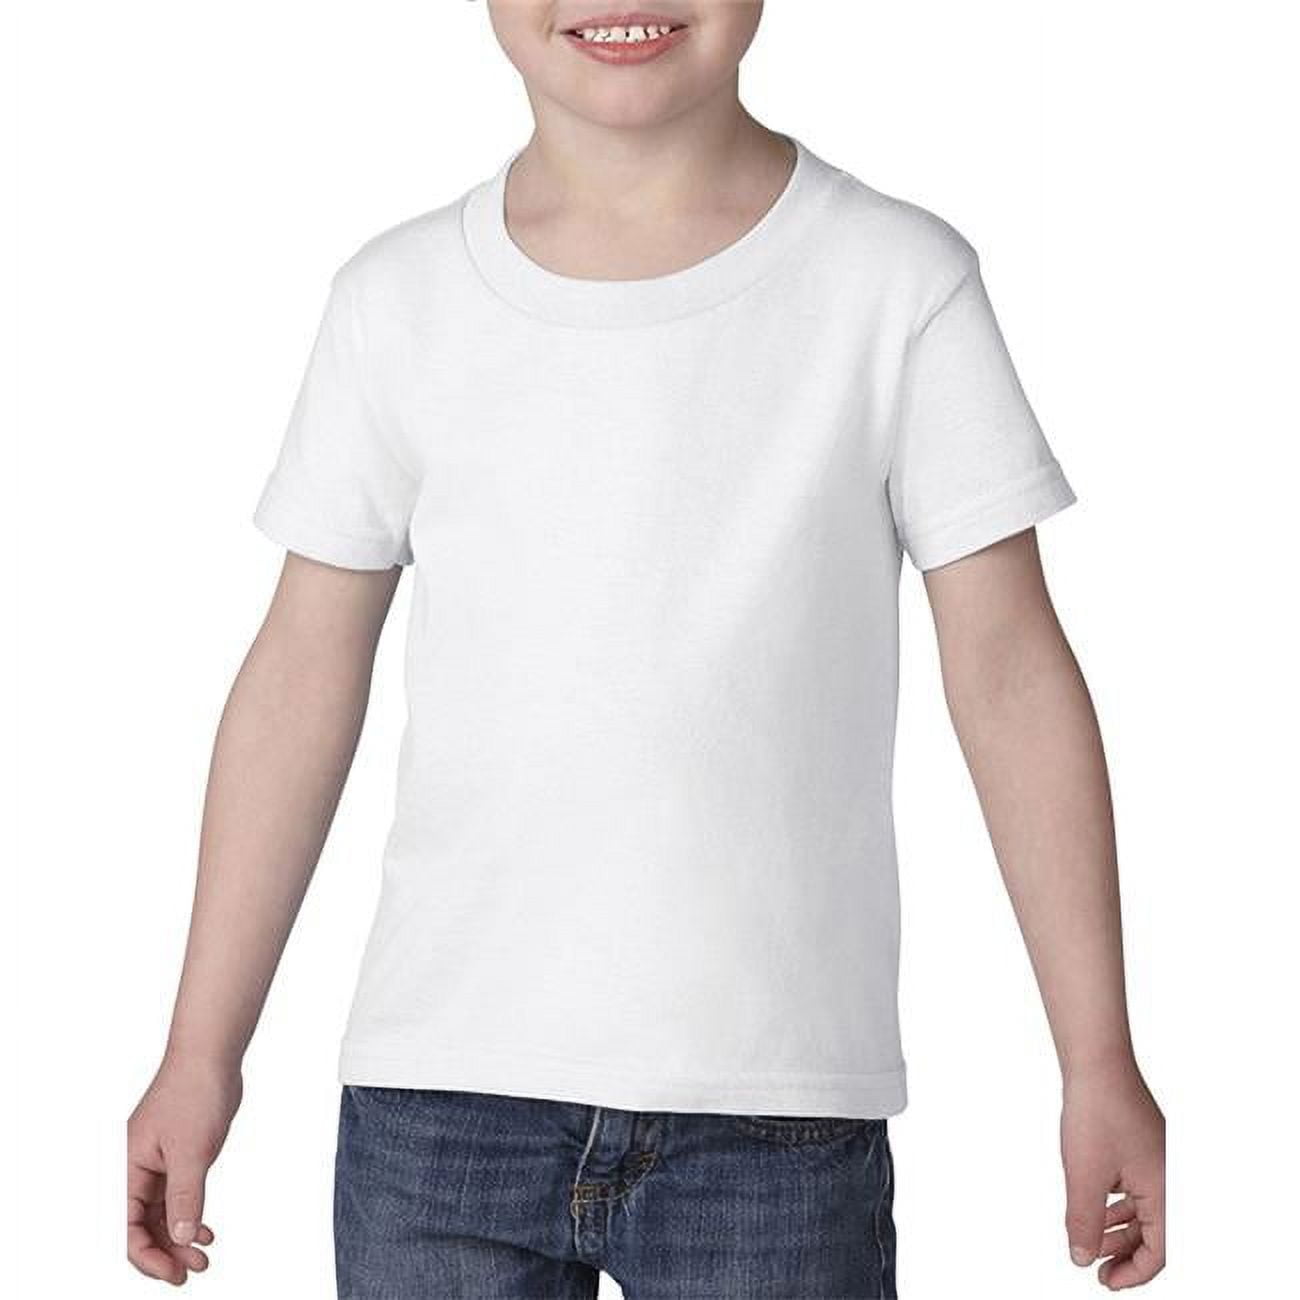 Gildan First Quality - 5100p Heavy Cotton Toddler T-shirt, White - Small - Case Of 12